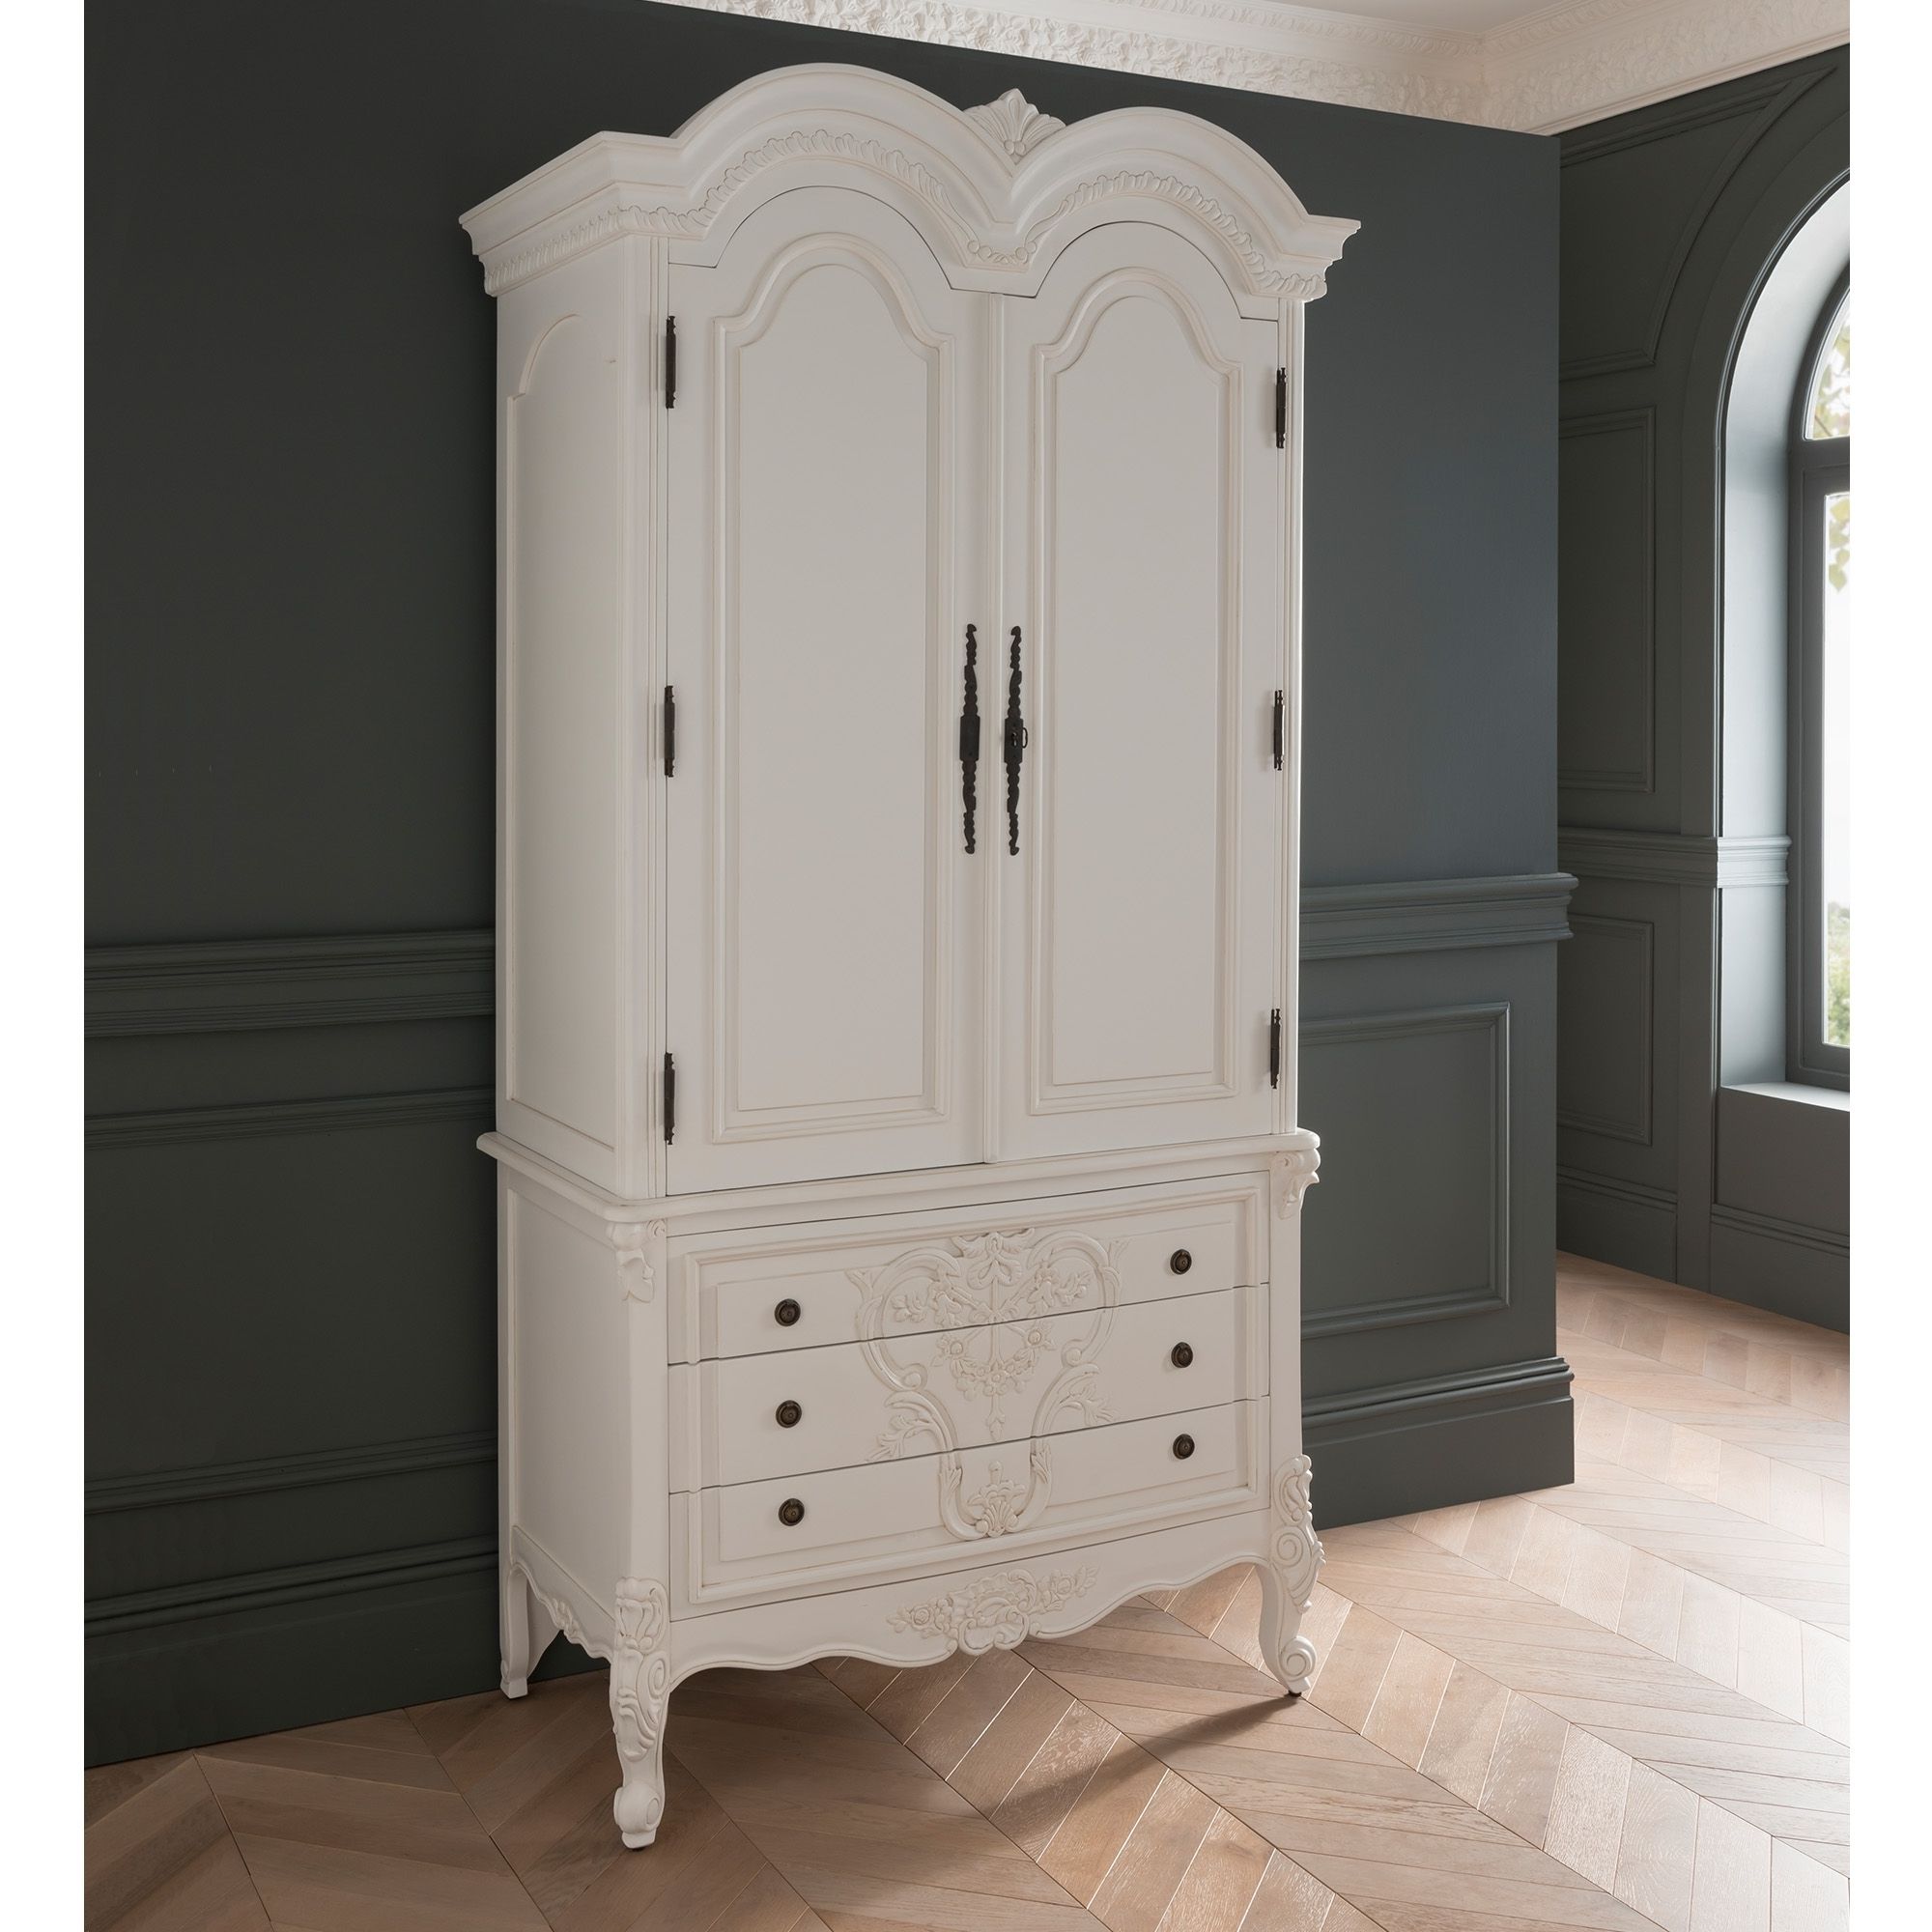 Antique French Style White Finished 1 Drawer Wardrobe | Homesdirect365 Regarding Shabby Chic White Wardrobes (View 9 of 20)